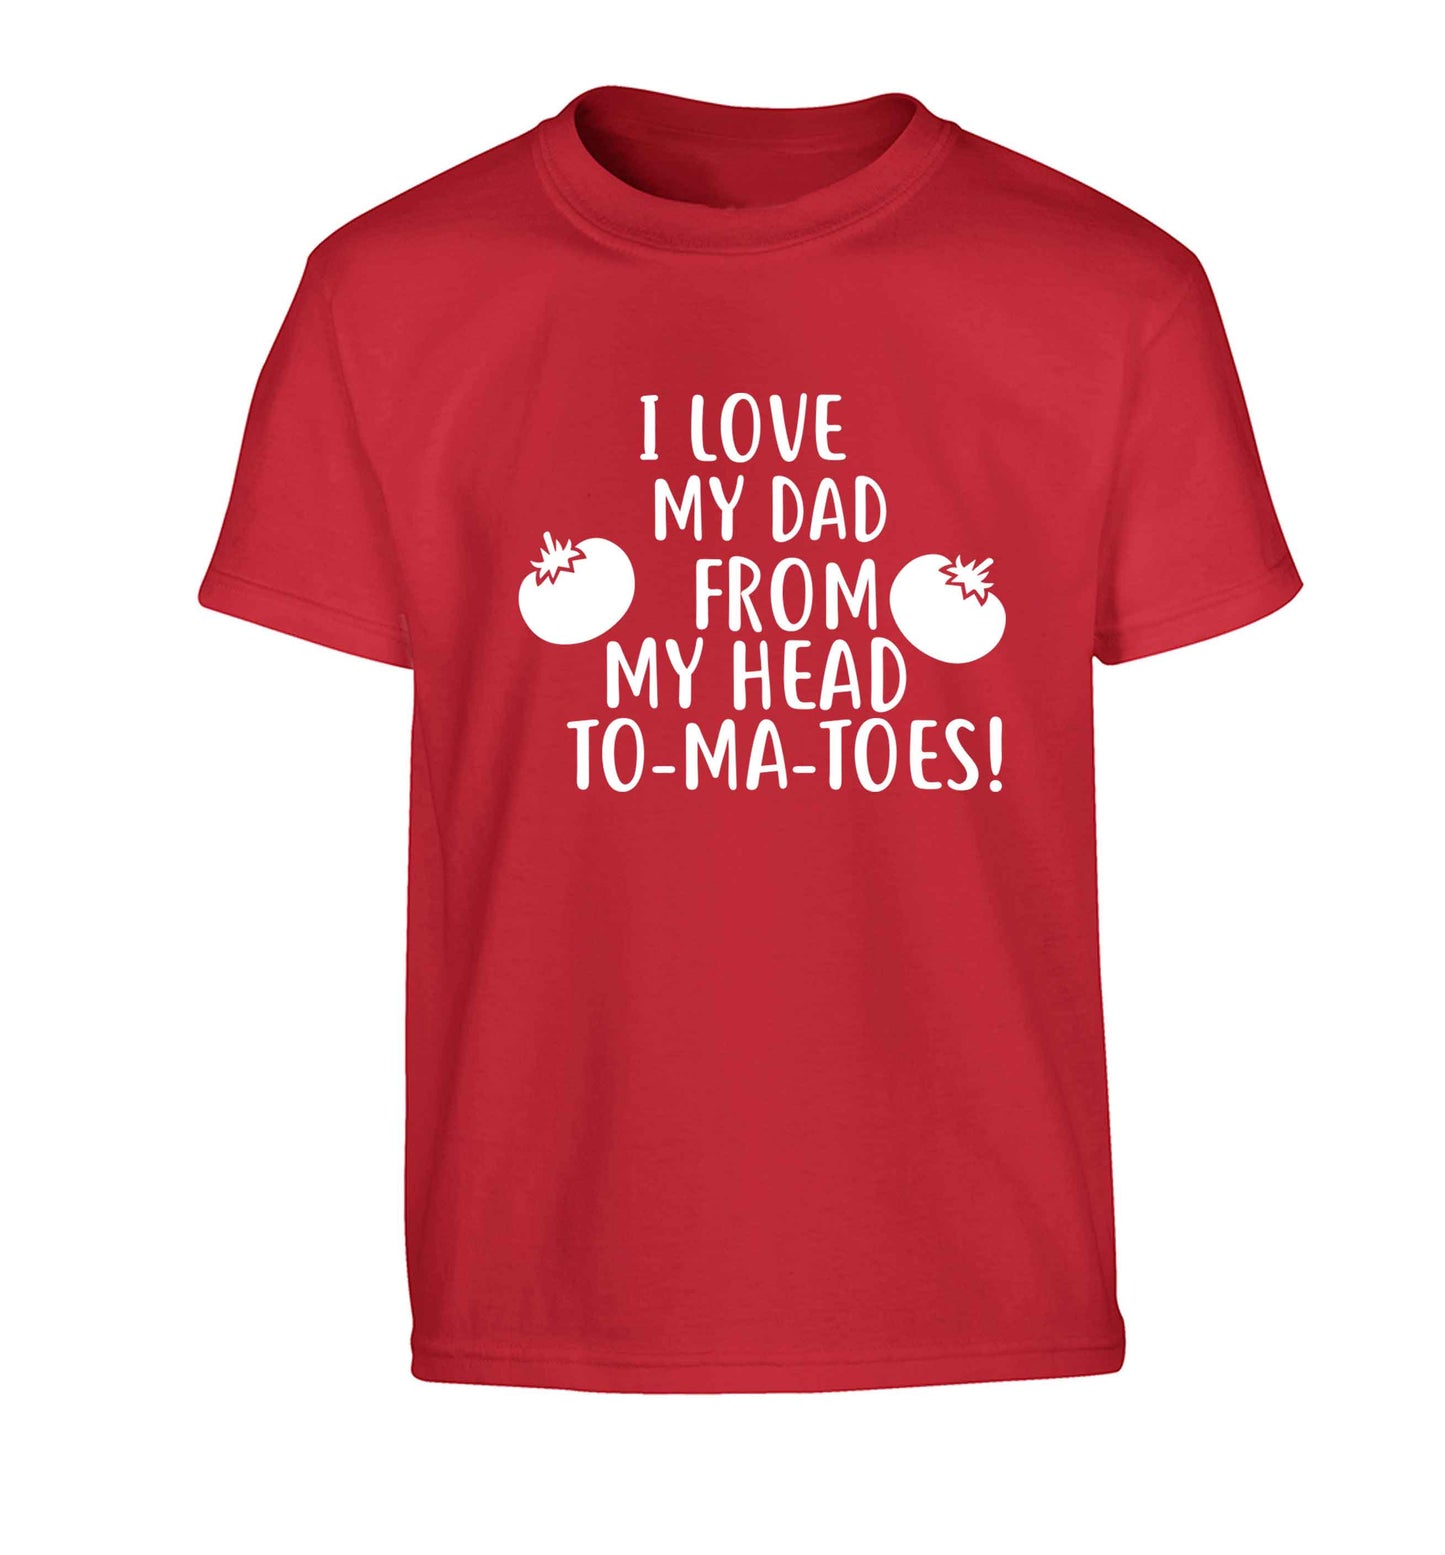 I love my dad from my head to-ma-toes Children's red Tshirt 12-13 Years